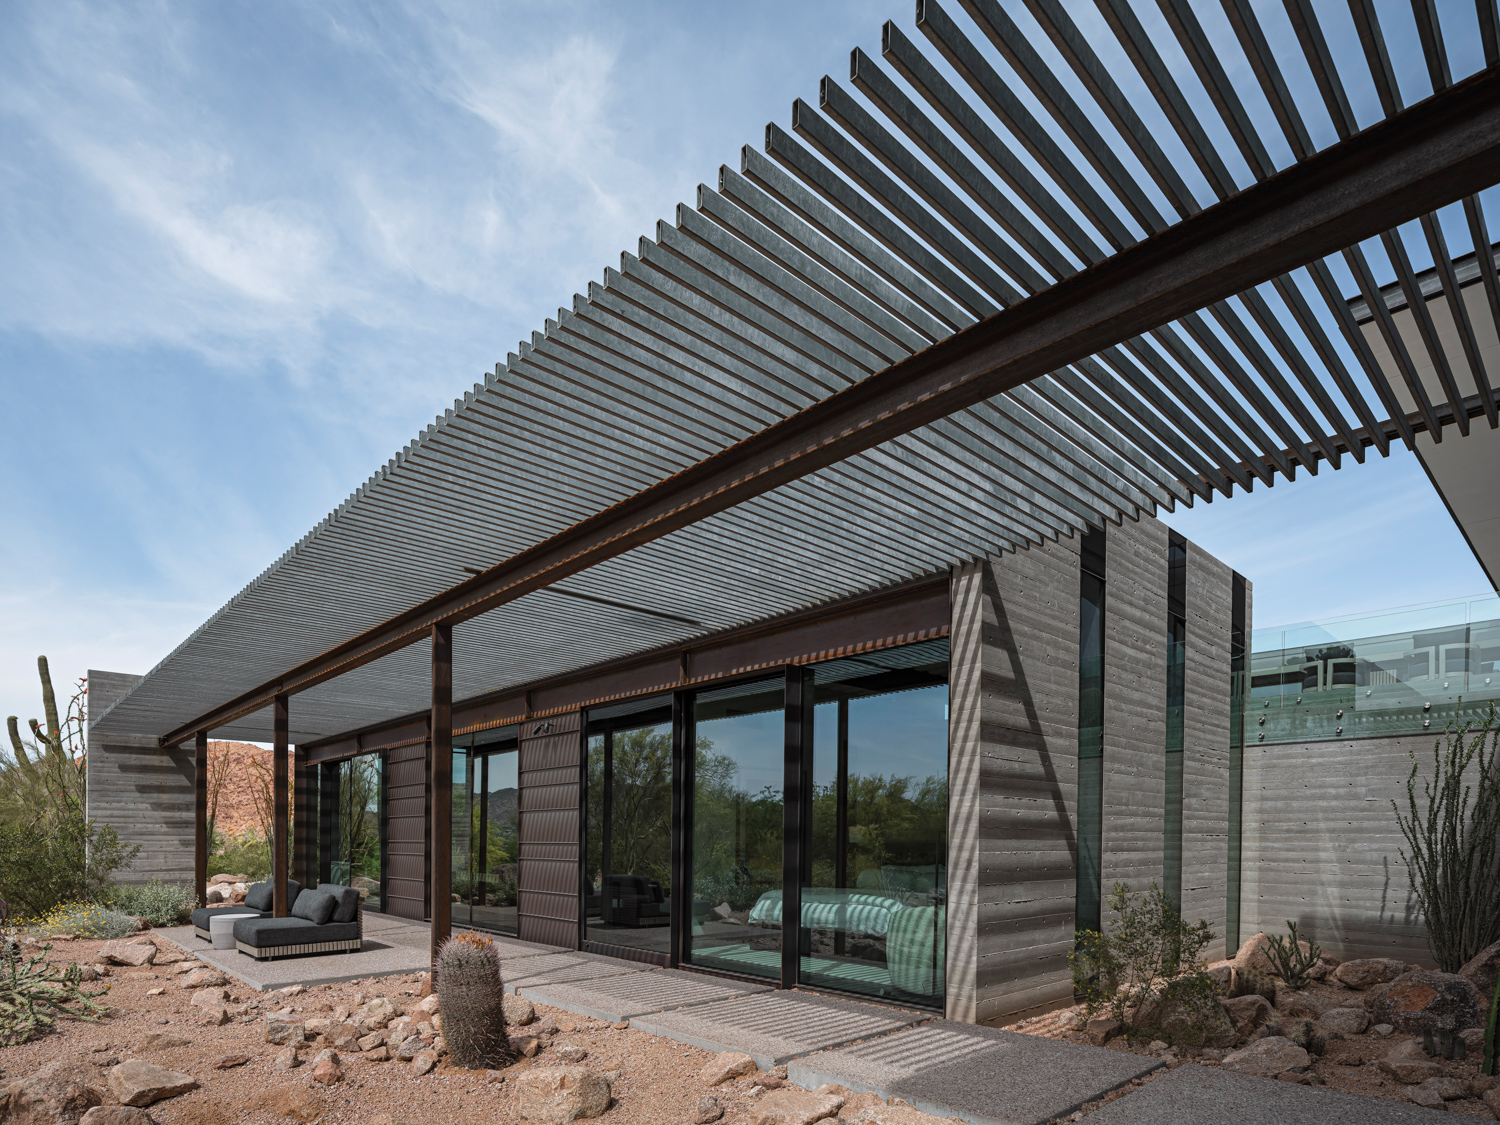 A steel-beam trellis hangs over the patio of a modern home.